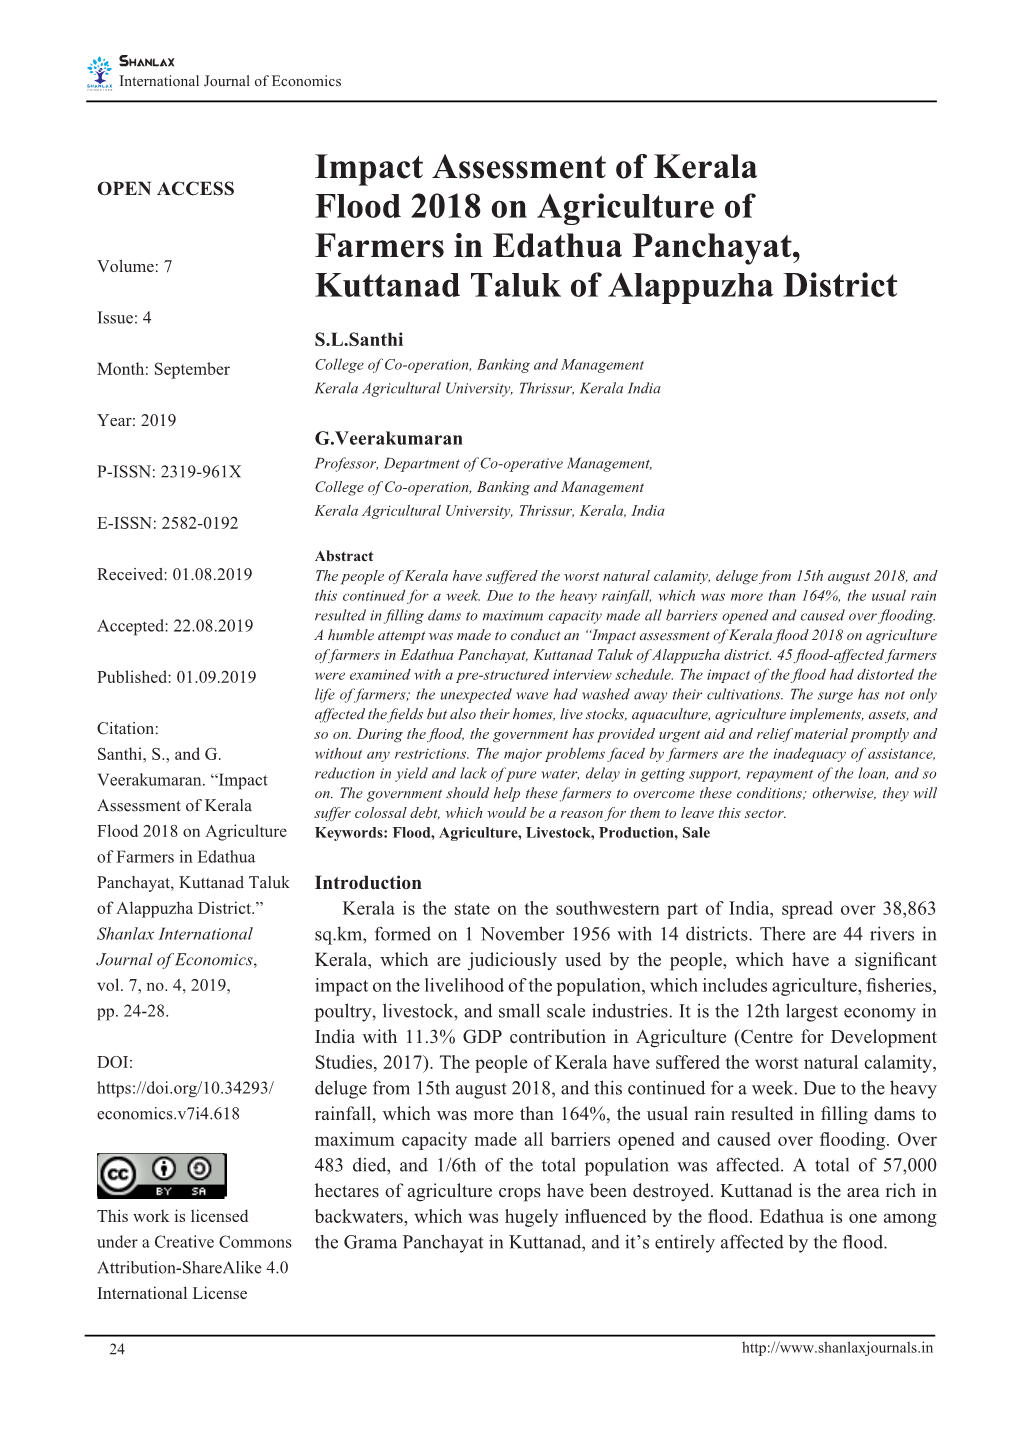 Impact Assessment of Kerala Flood 2018 on Agriculture of Farmers in Edathua Panchayat, Kuttanad Taluk of Alappuzha District